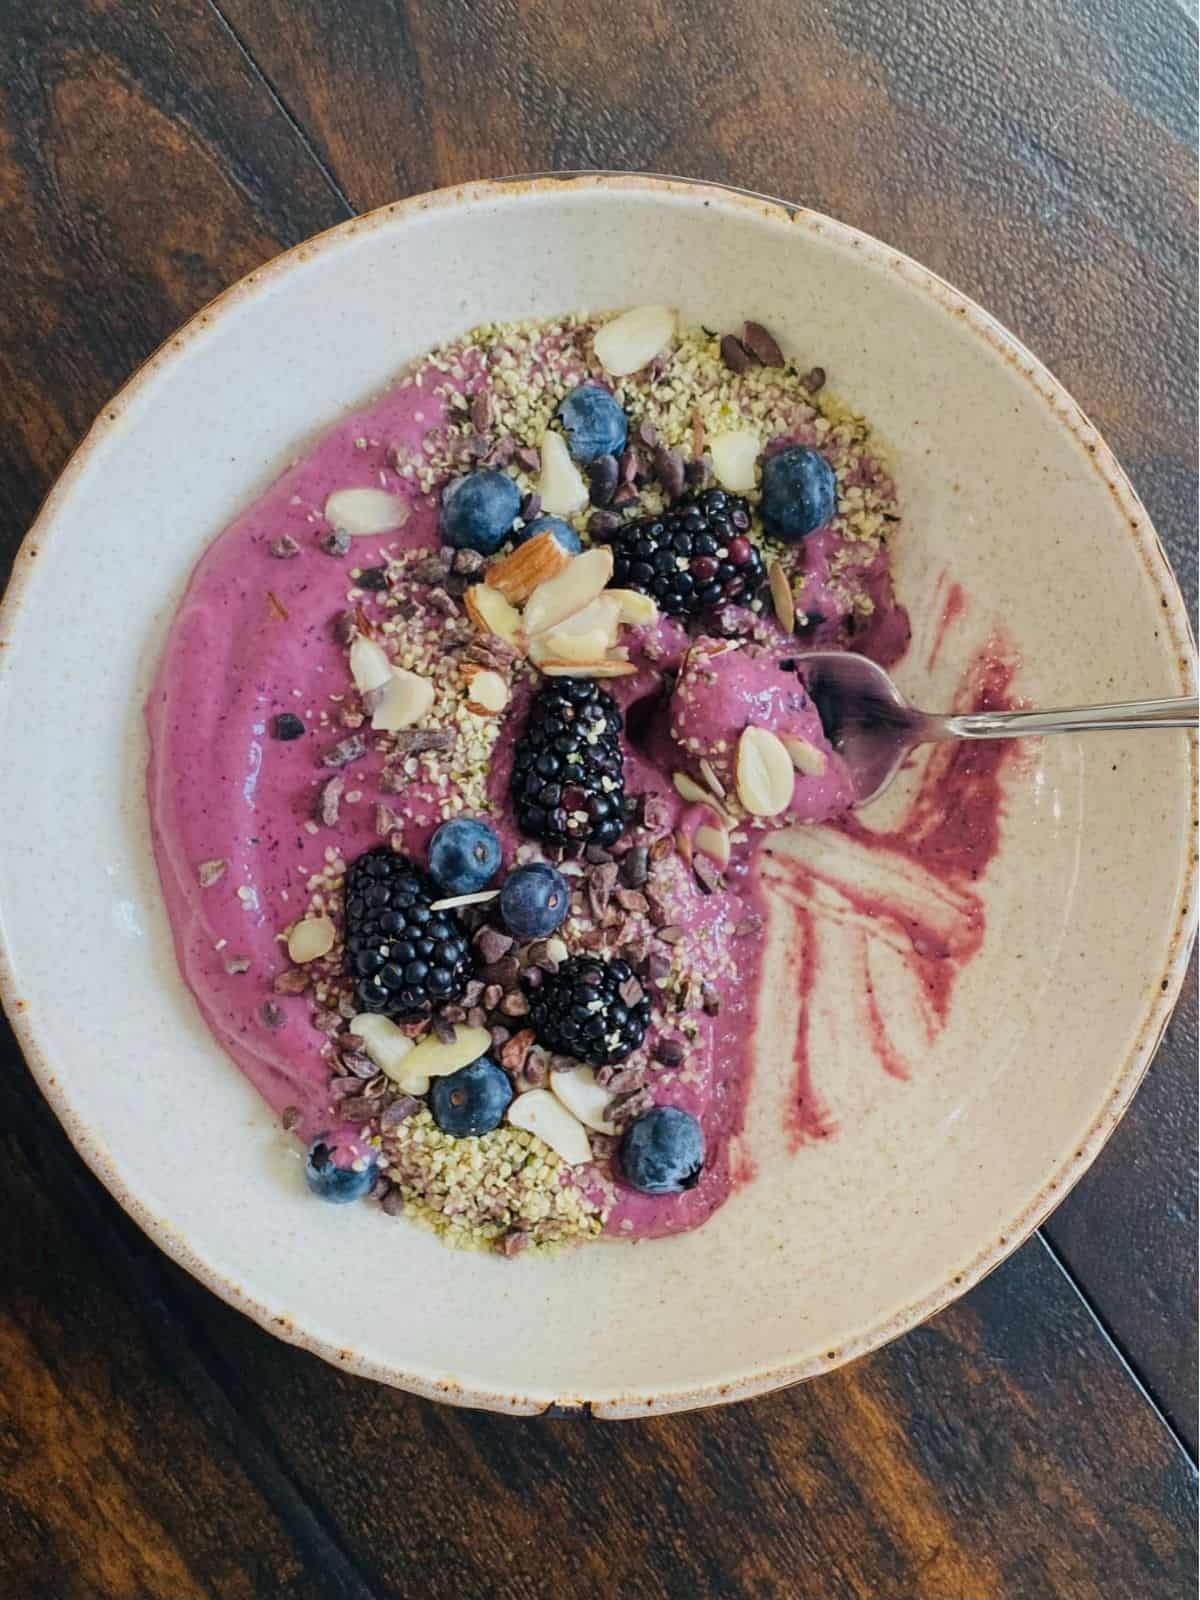 Partially eaten Glow Smoothie Bowl with spoon on wood table